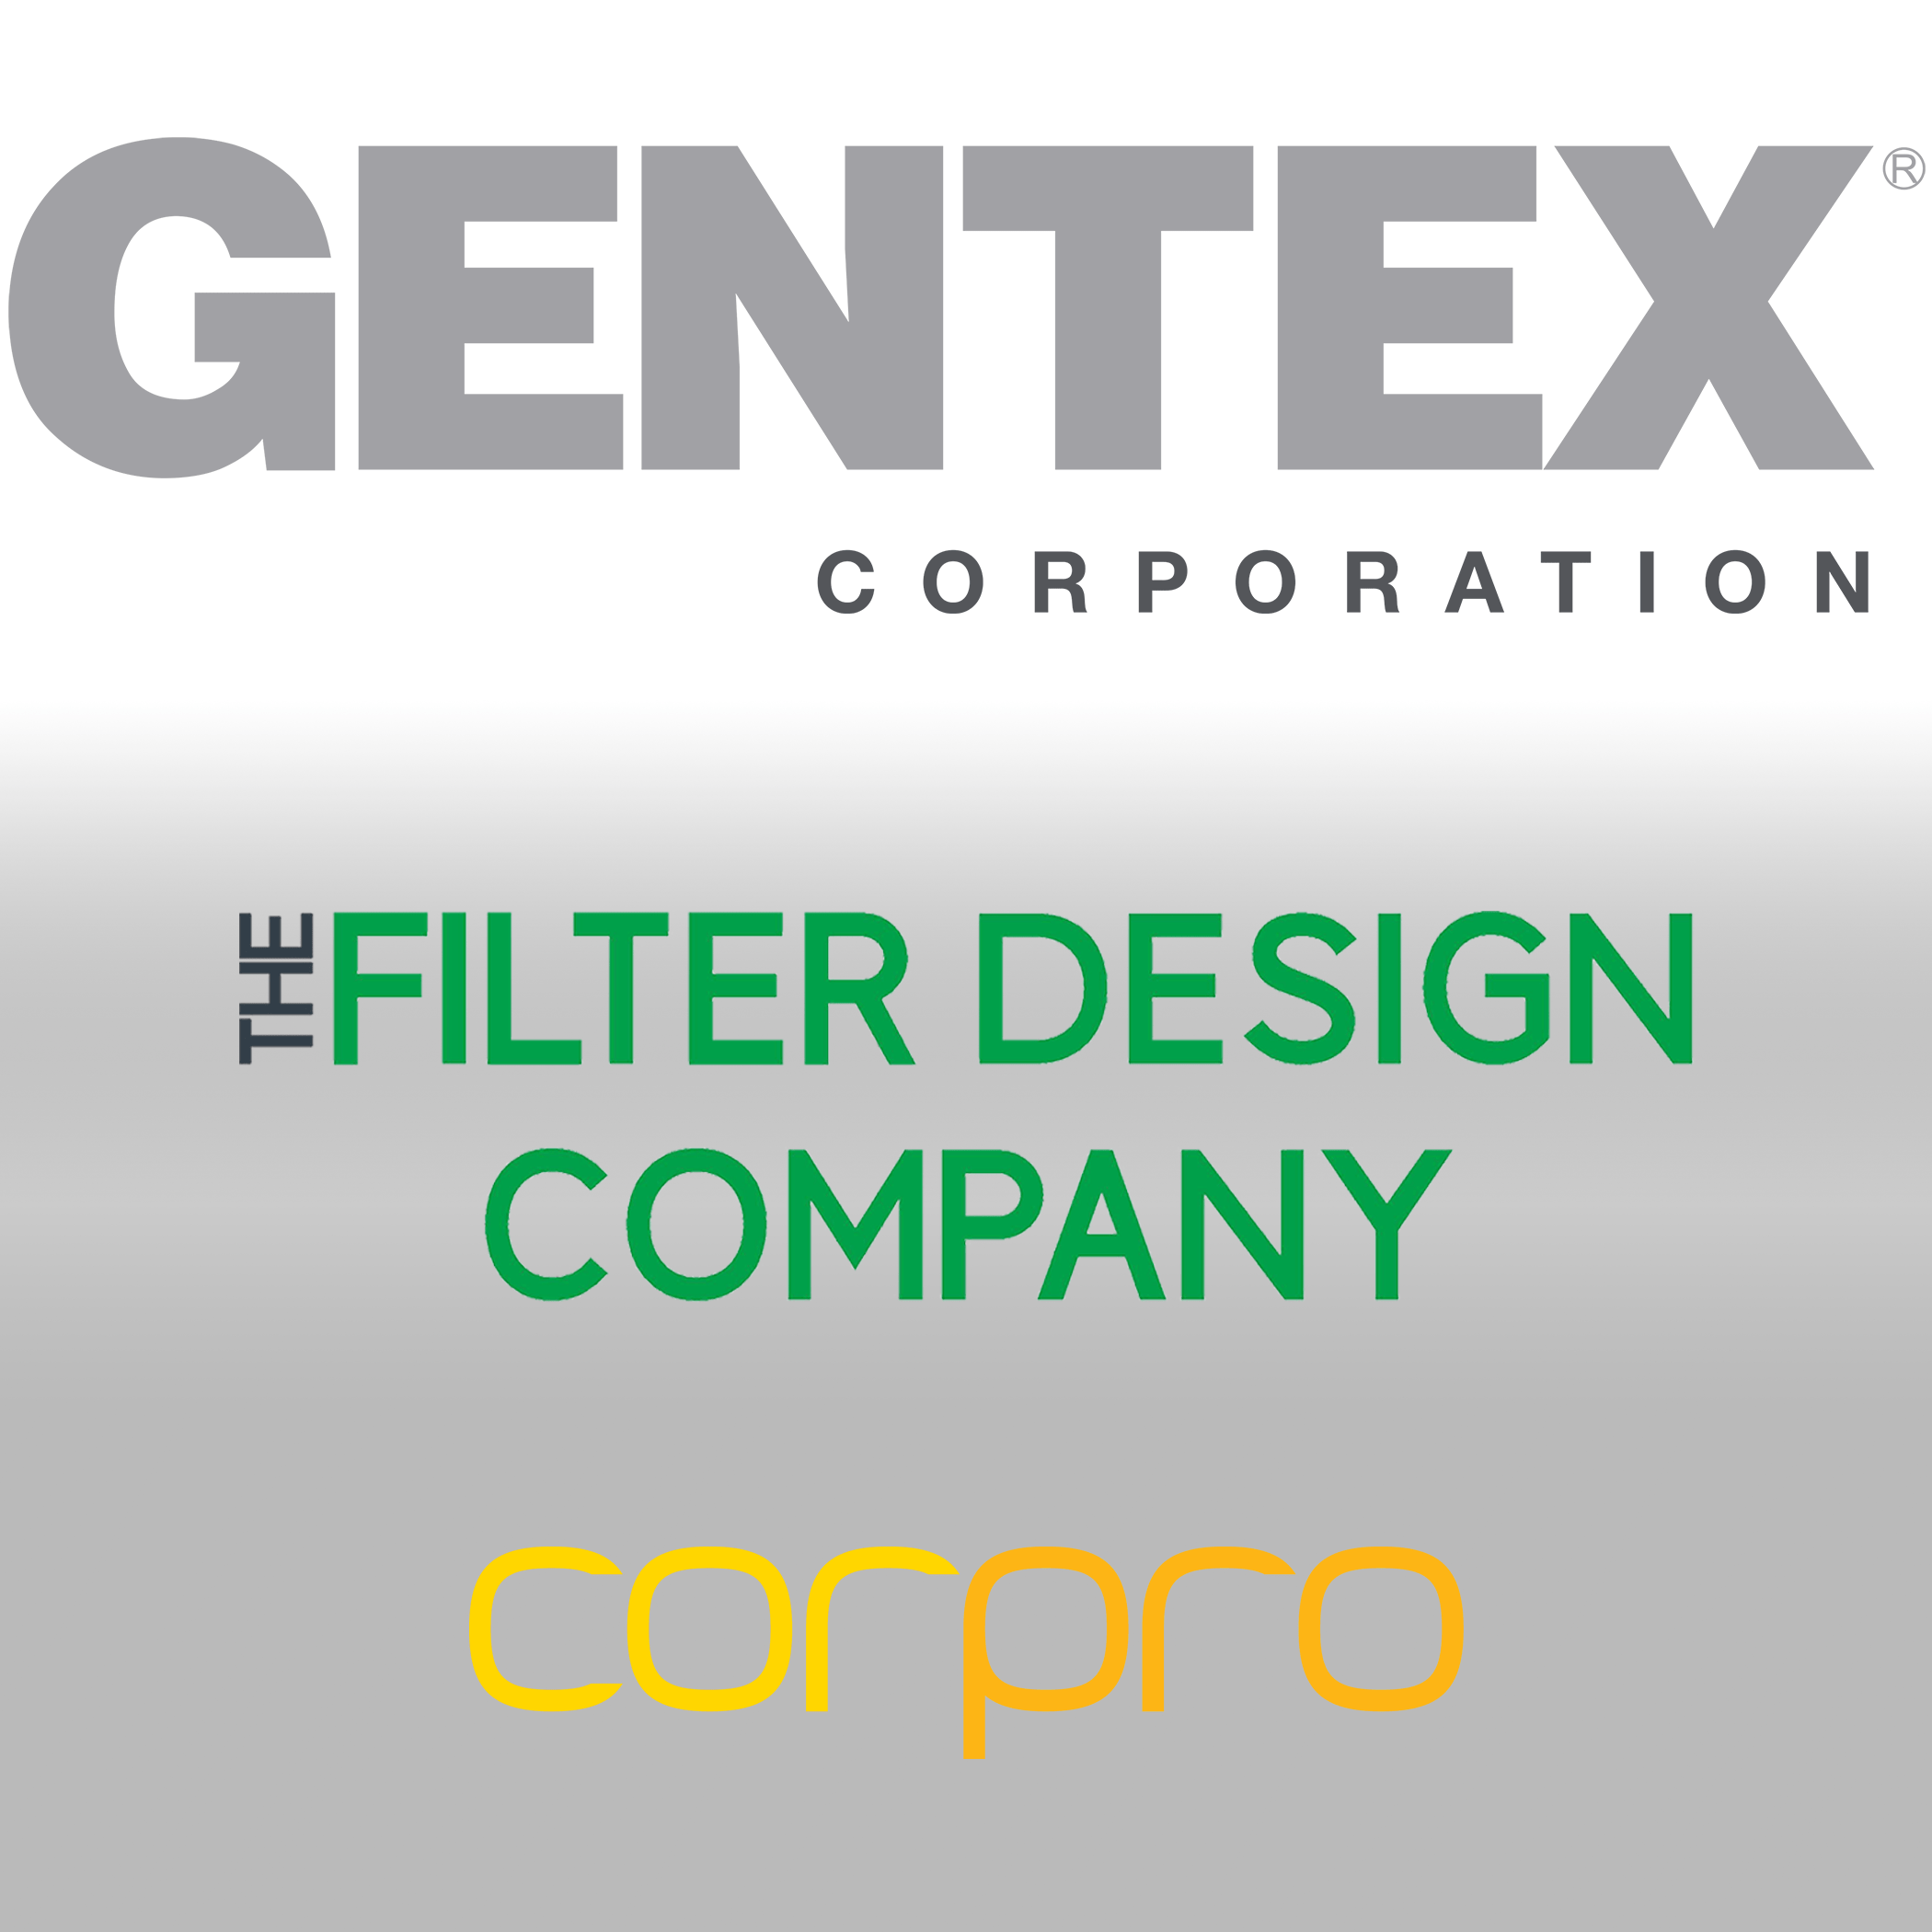 Gentex Corporation acquires the Filter Design Company and Core Protection Systems